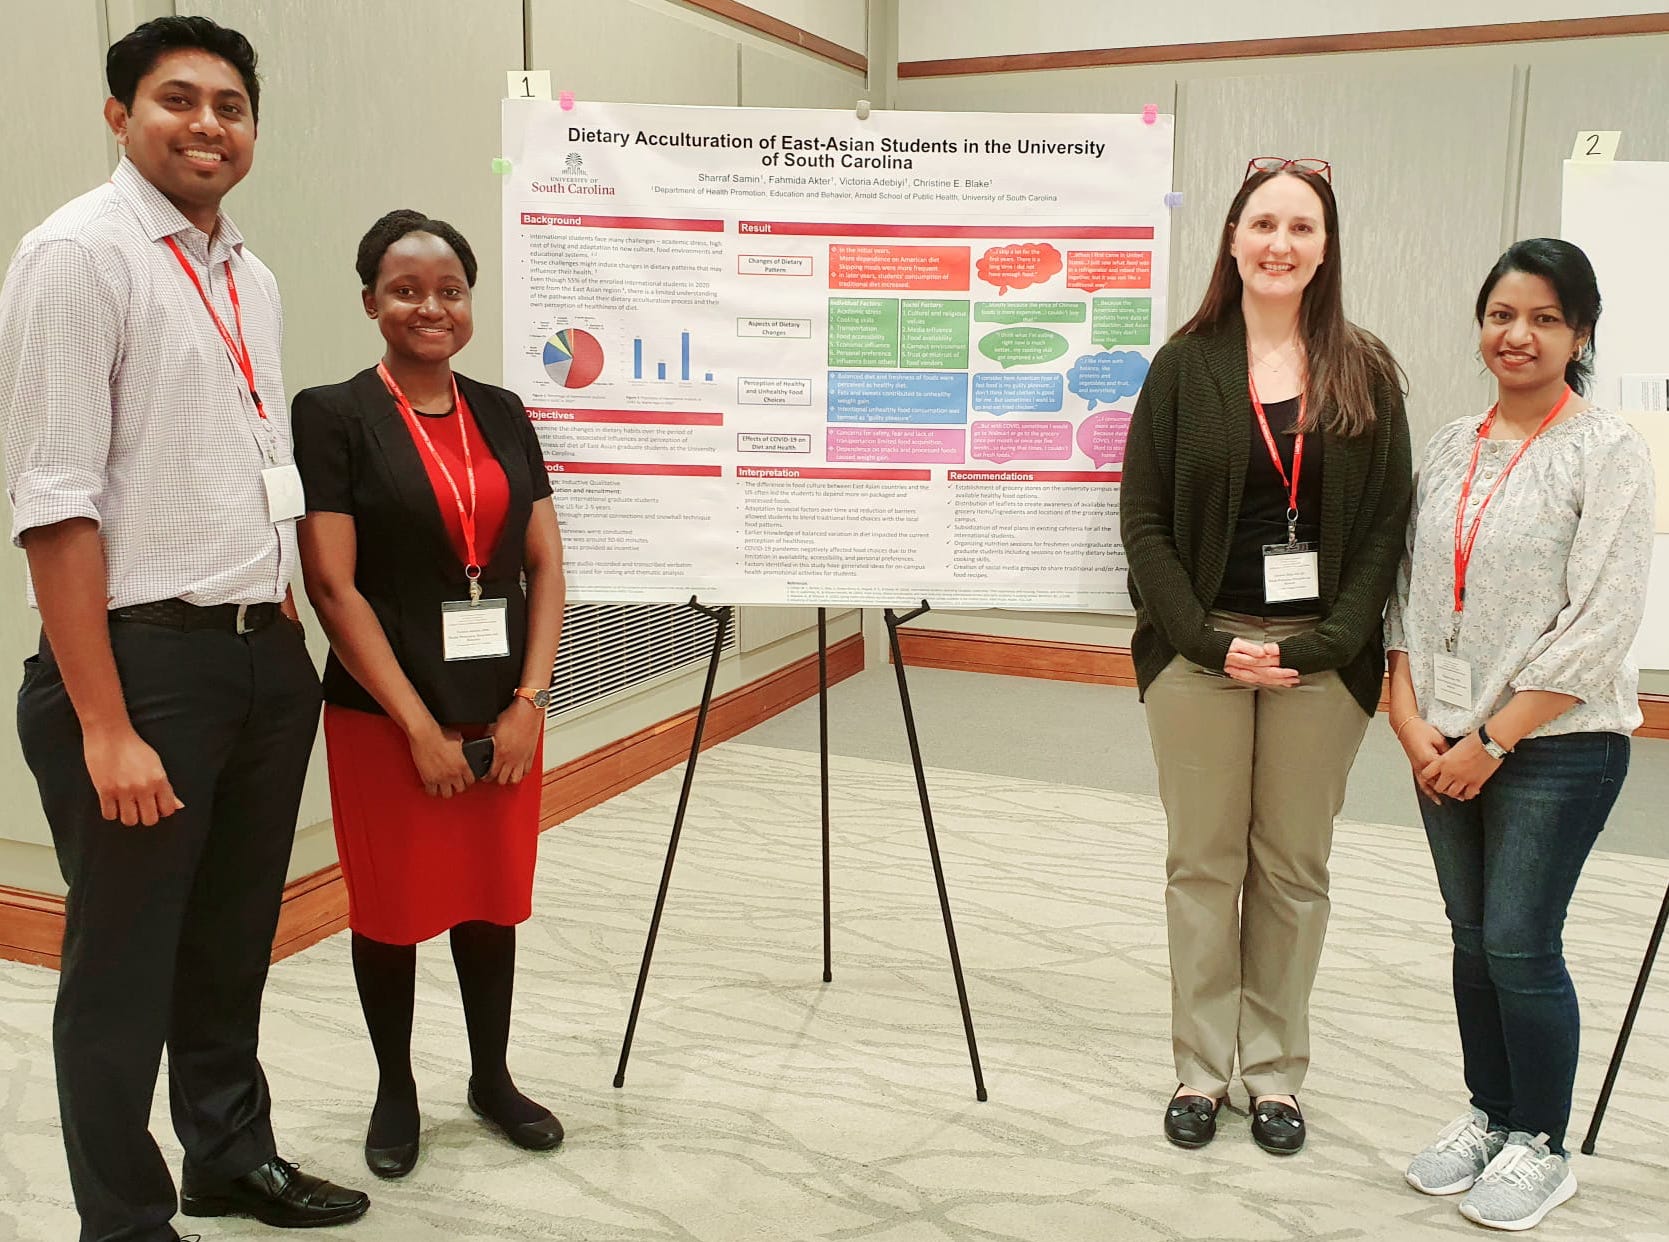 Victoria Adebiyi, Fahmida Akter, and Sharraf Samin presenting their poster titled, "Dietary Acculturation of East Asian Students in the University of South Carolina."